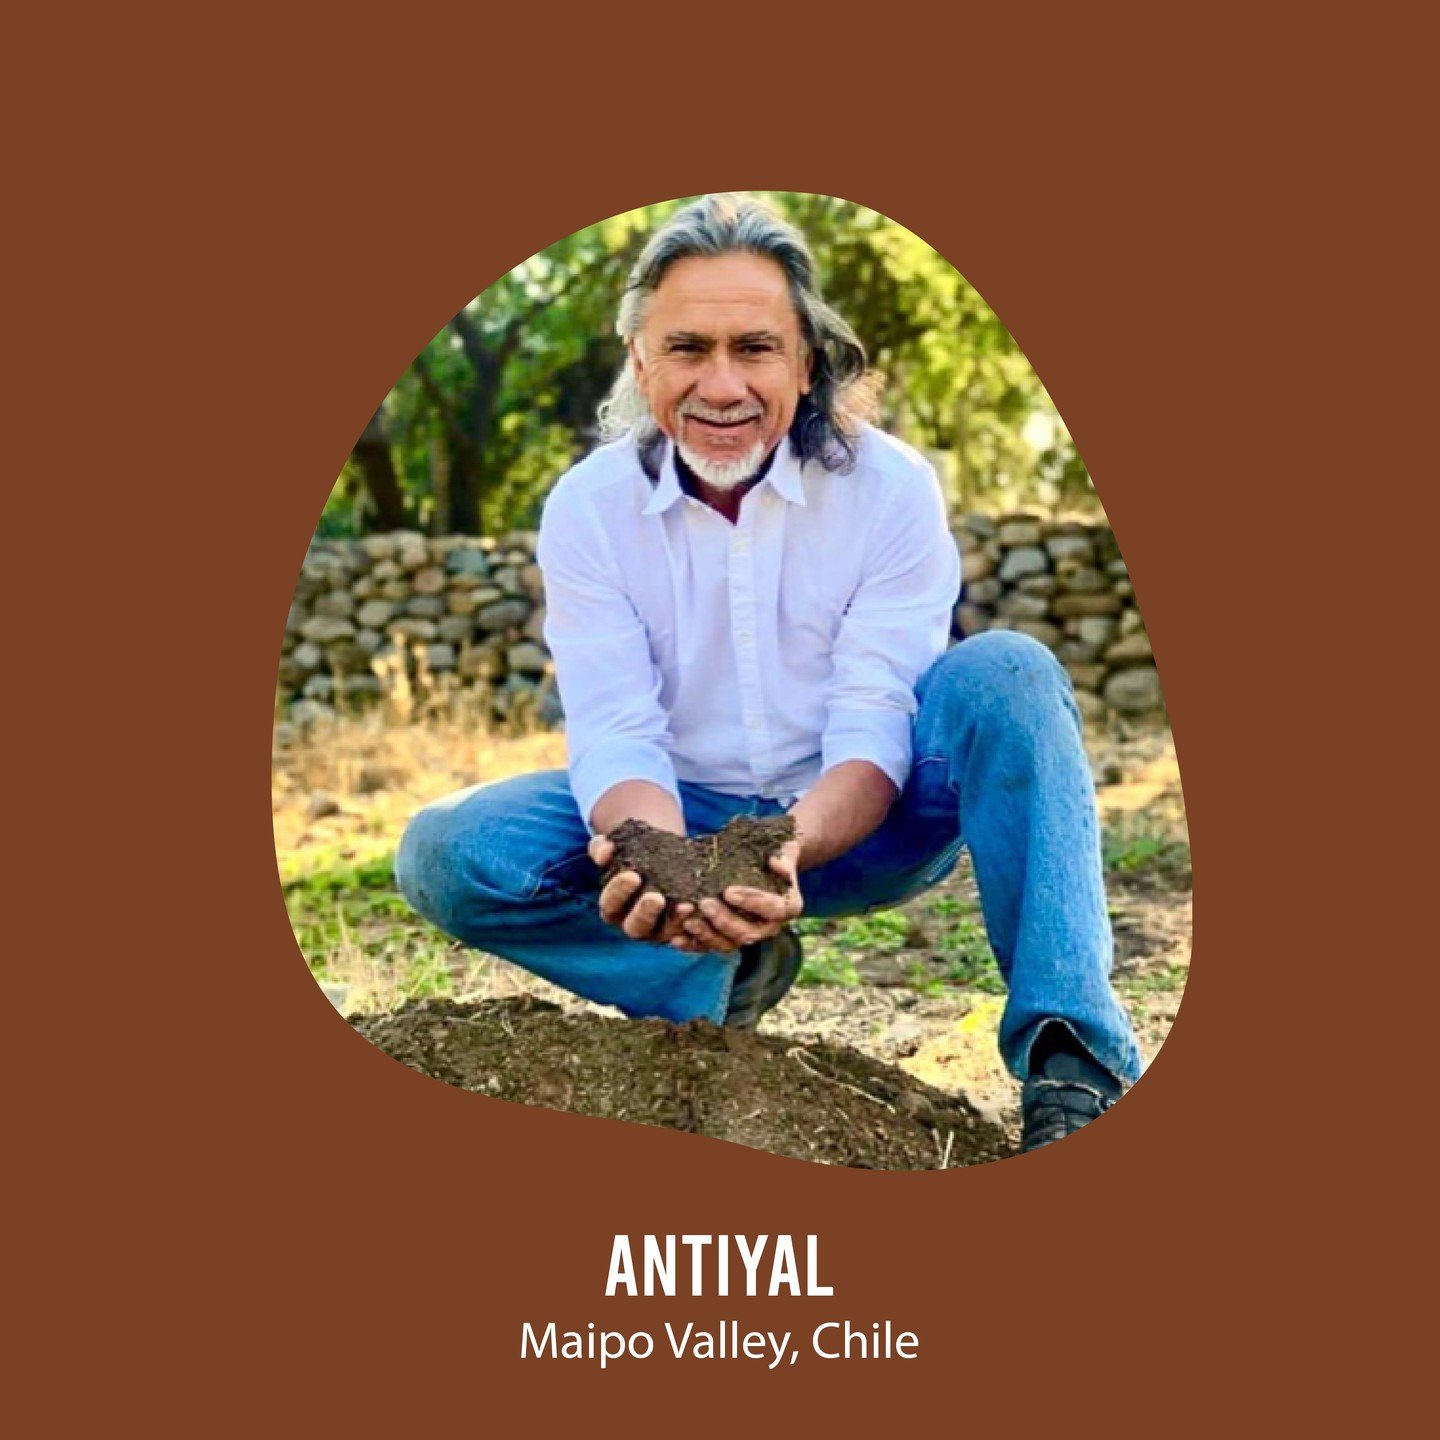 Biodynamic farming aims to create a self-sustaining system by treating the farm as a living organism and following celestial and lunar rhythms for planting and harvesting. Don&rsquo;t miss the wines of Antiyal by Alvaro Espinoza a leading figure in b